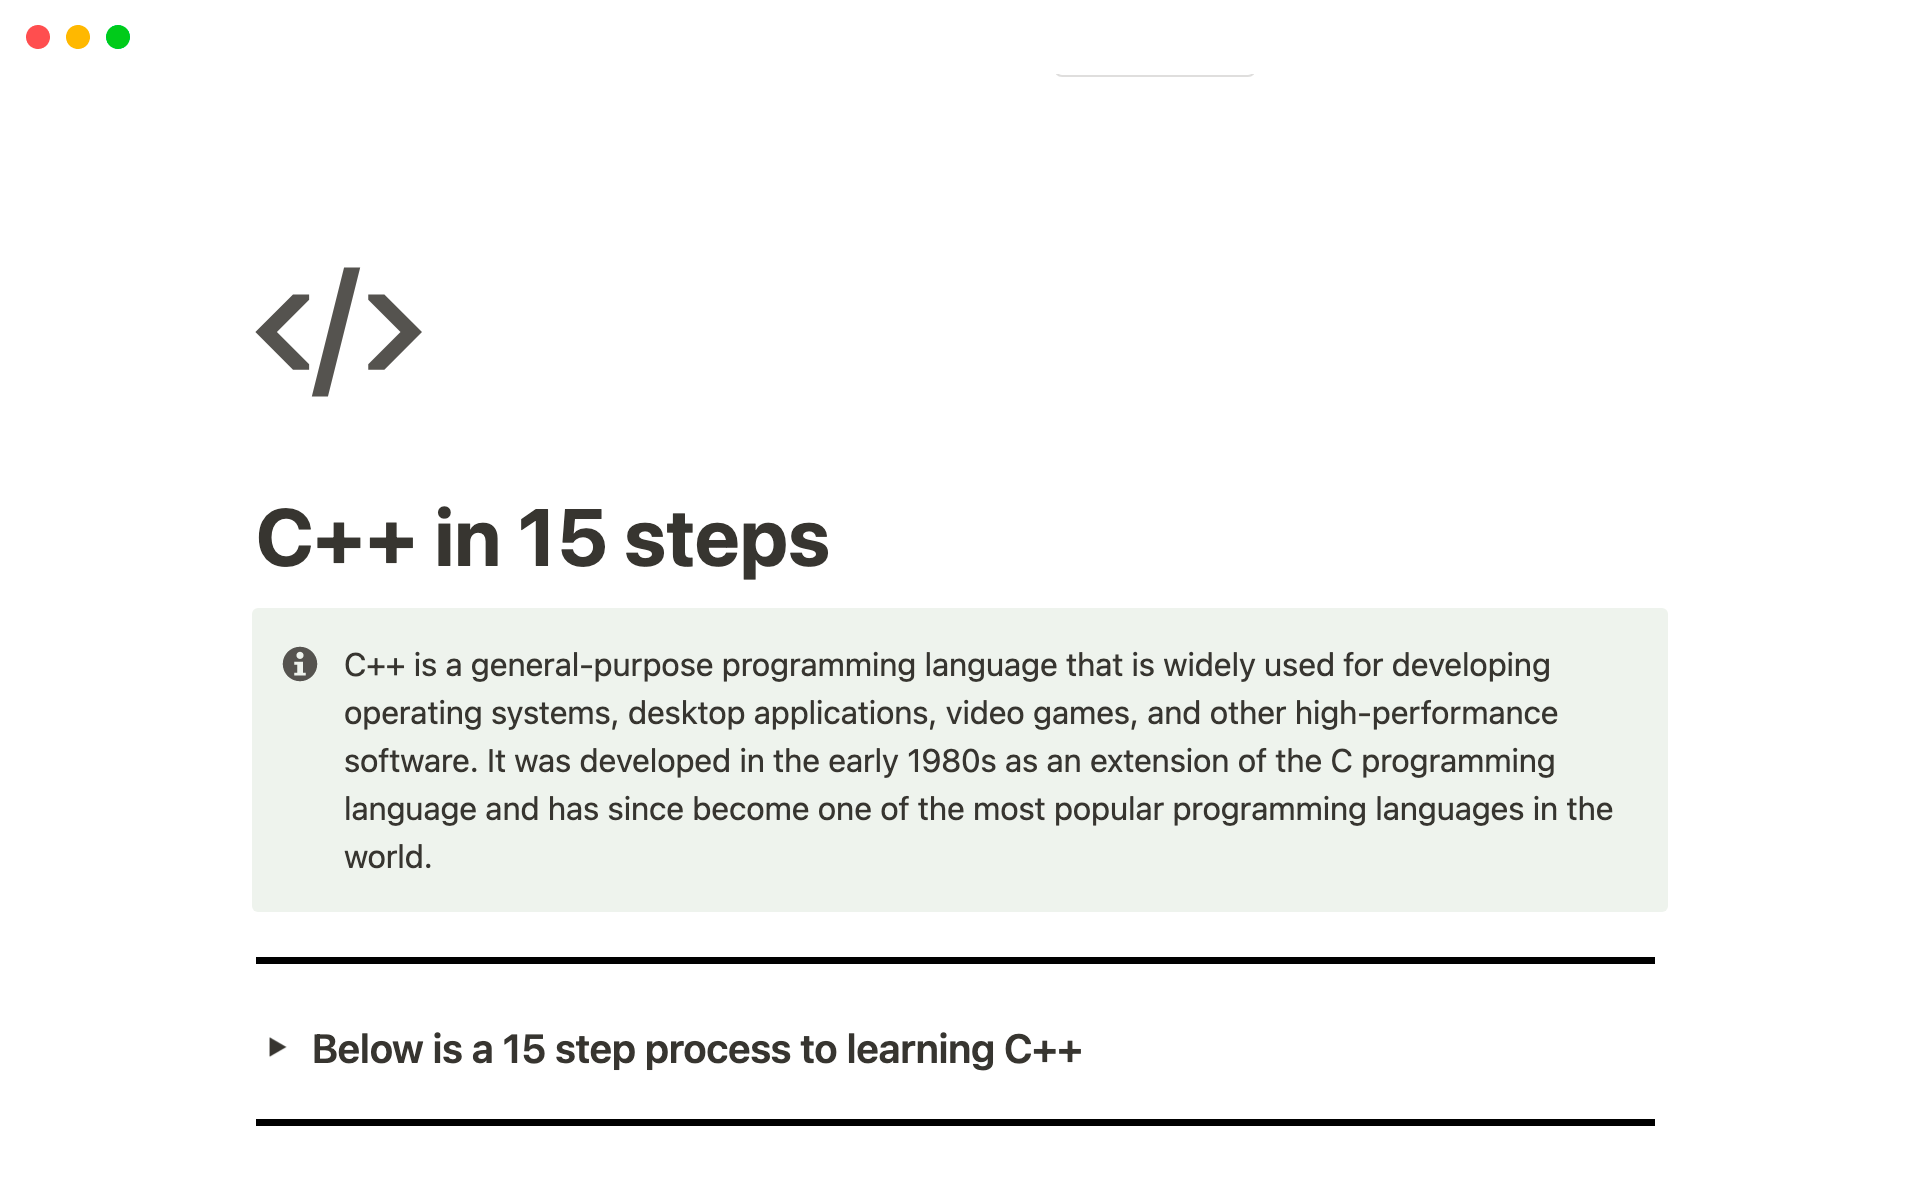 This template contains information and tutorials for learning C++ programming language.